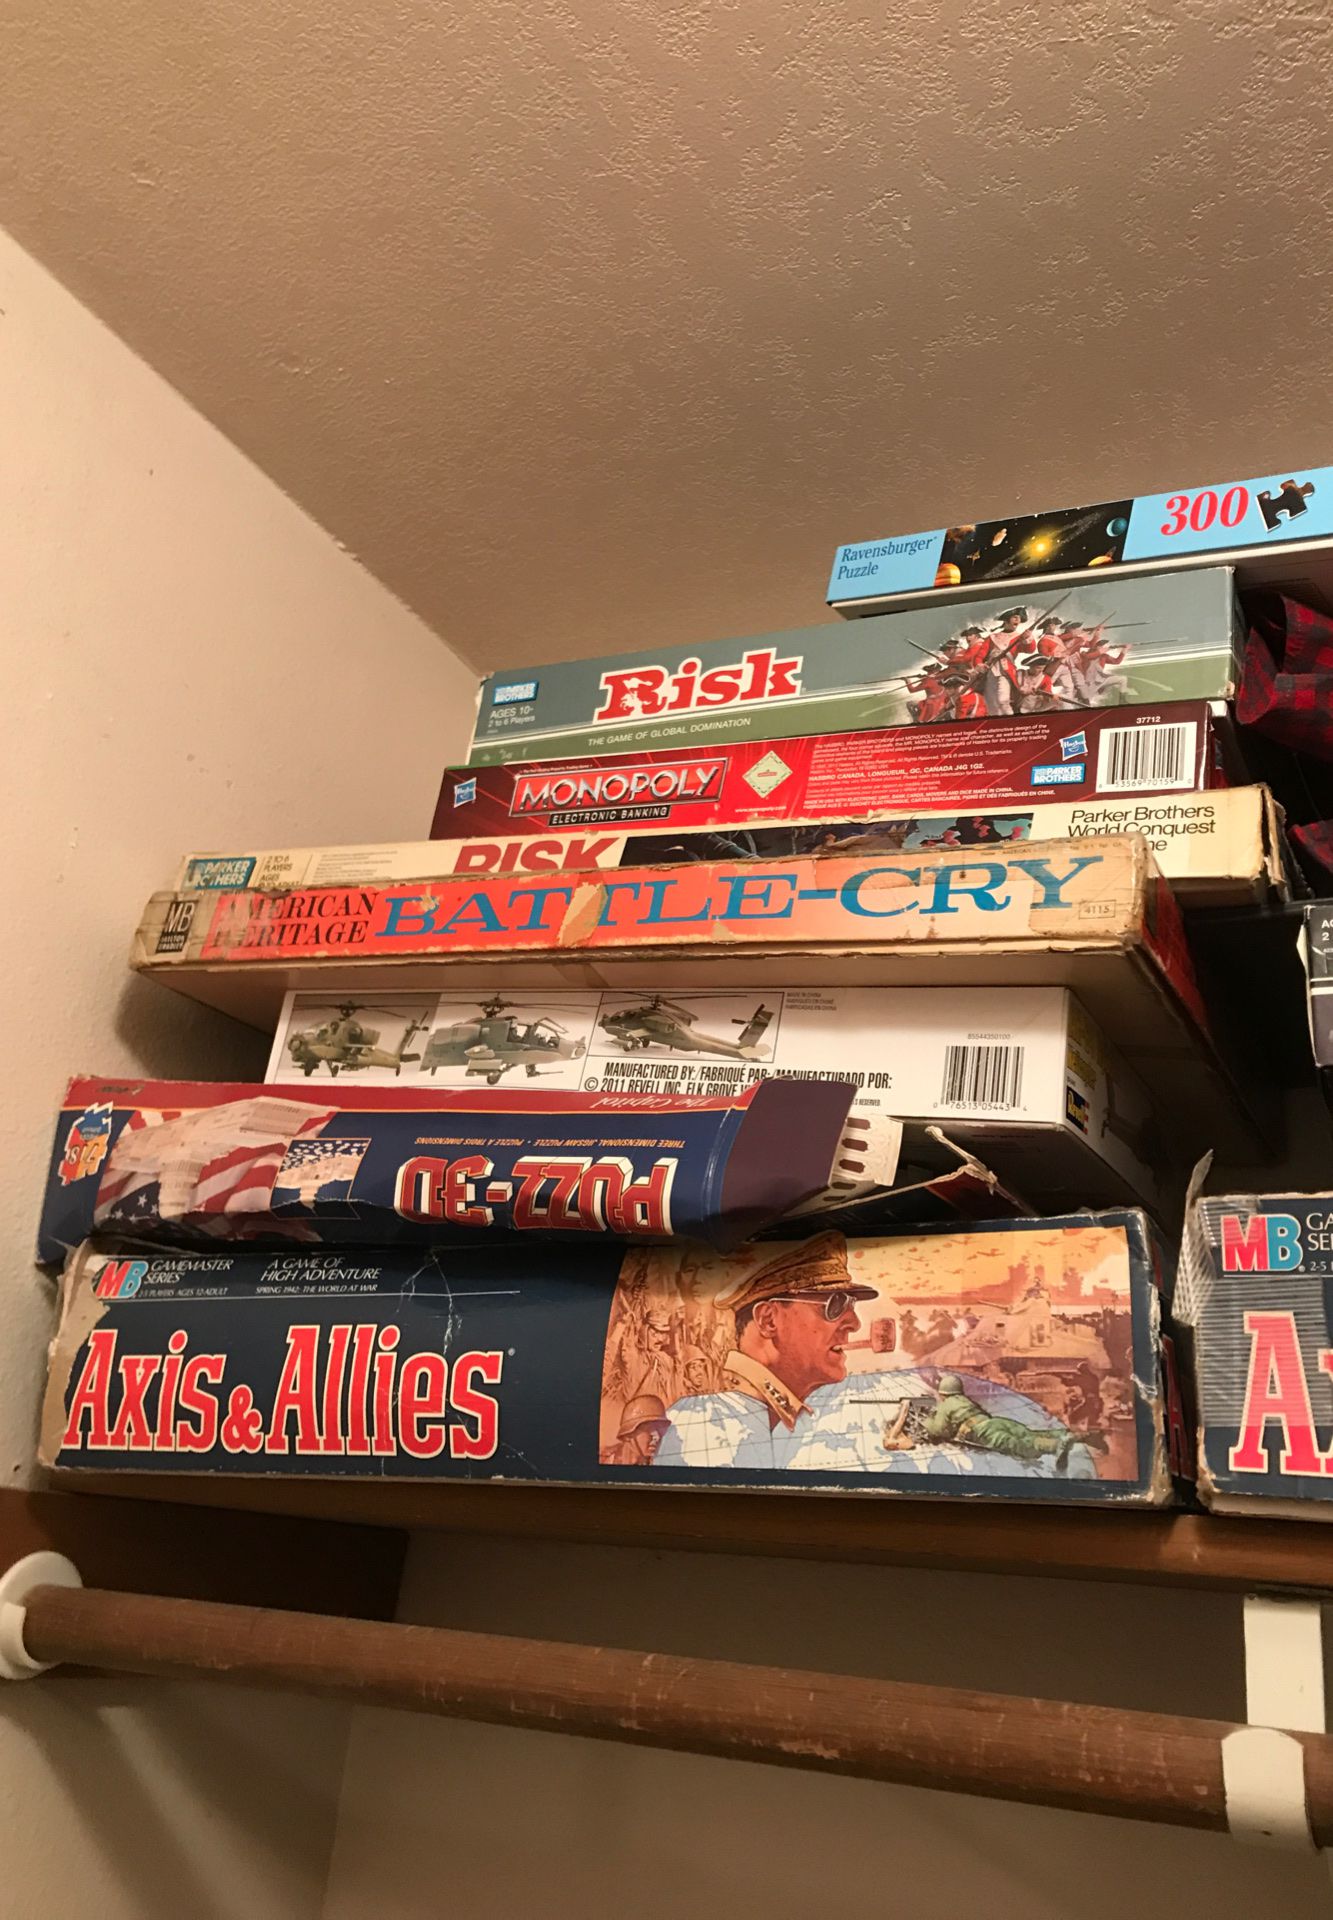 Board games / axis and allies / risk / monopoly